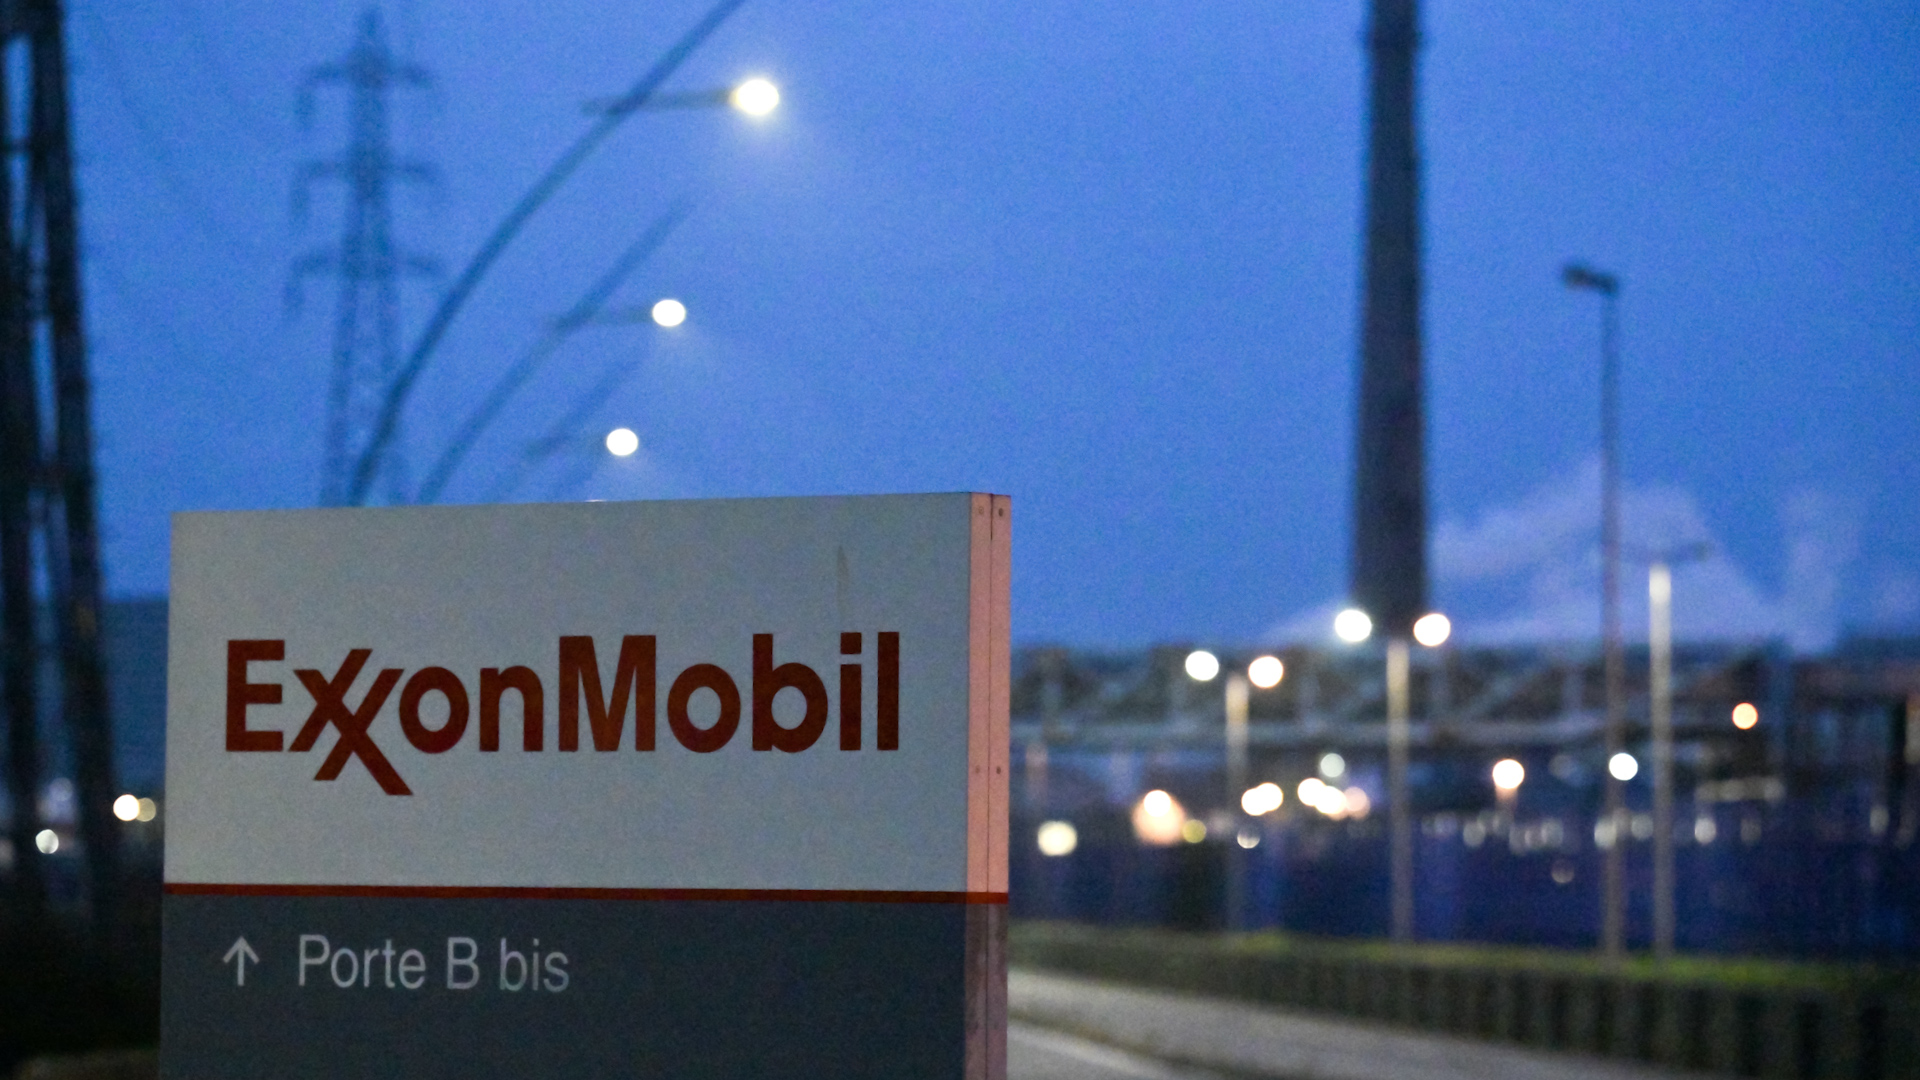 Exxon Mobil took a step toward closing its $60 billion deal to acquire Pioneer after reaching an agreement with the Federal Trade Commission.